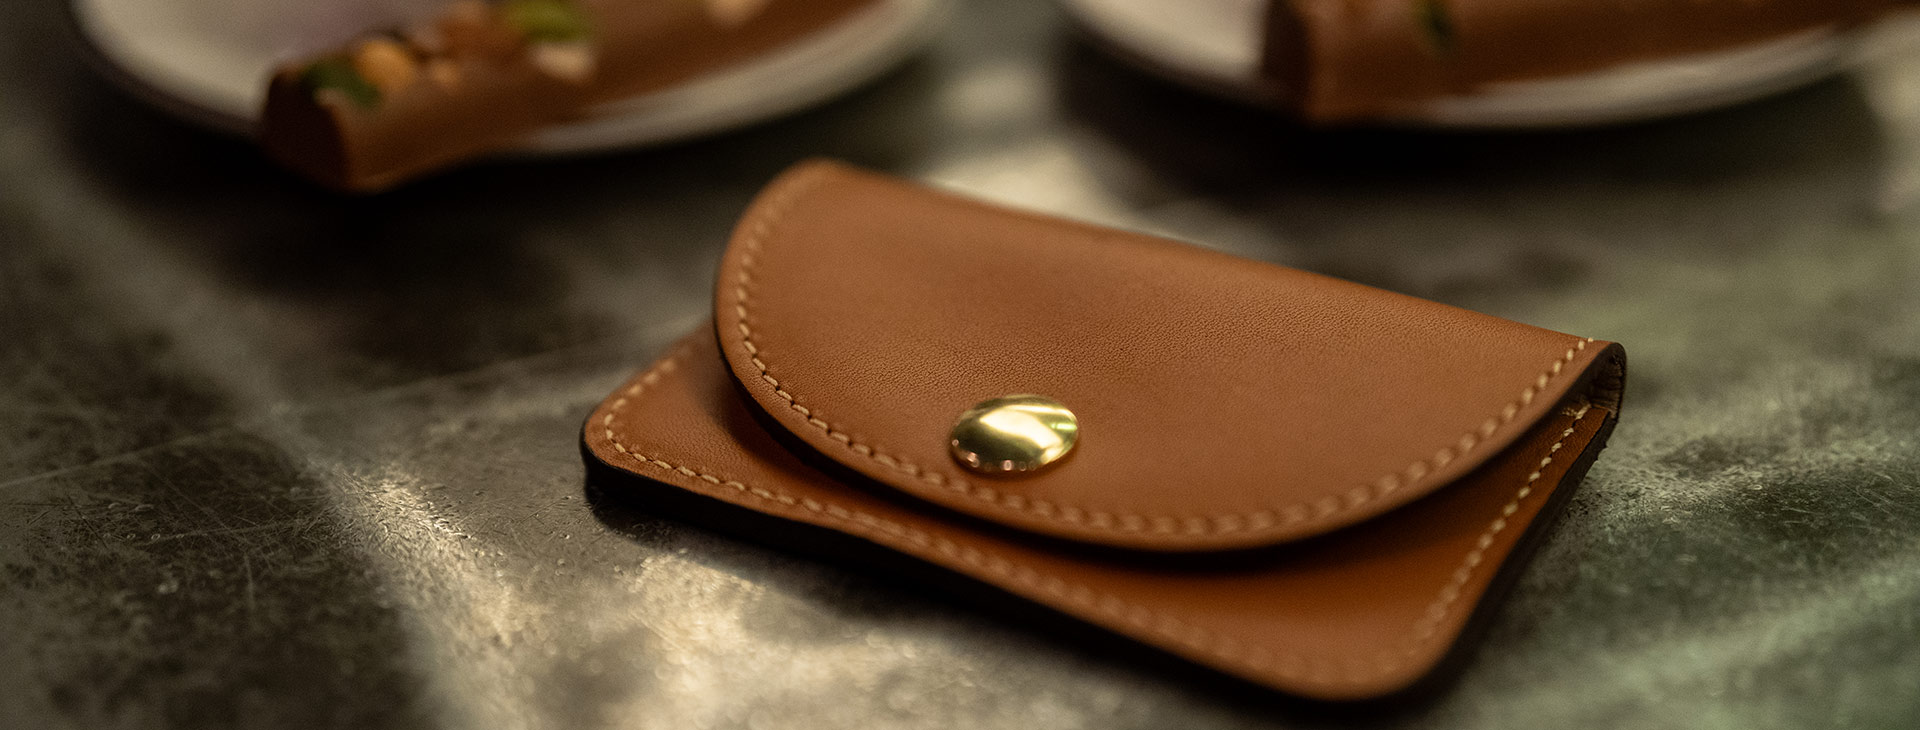 Wallets for Women | Leather Purses | Aspinal of London